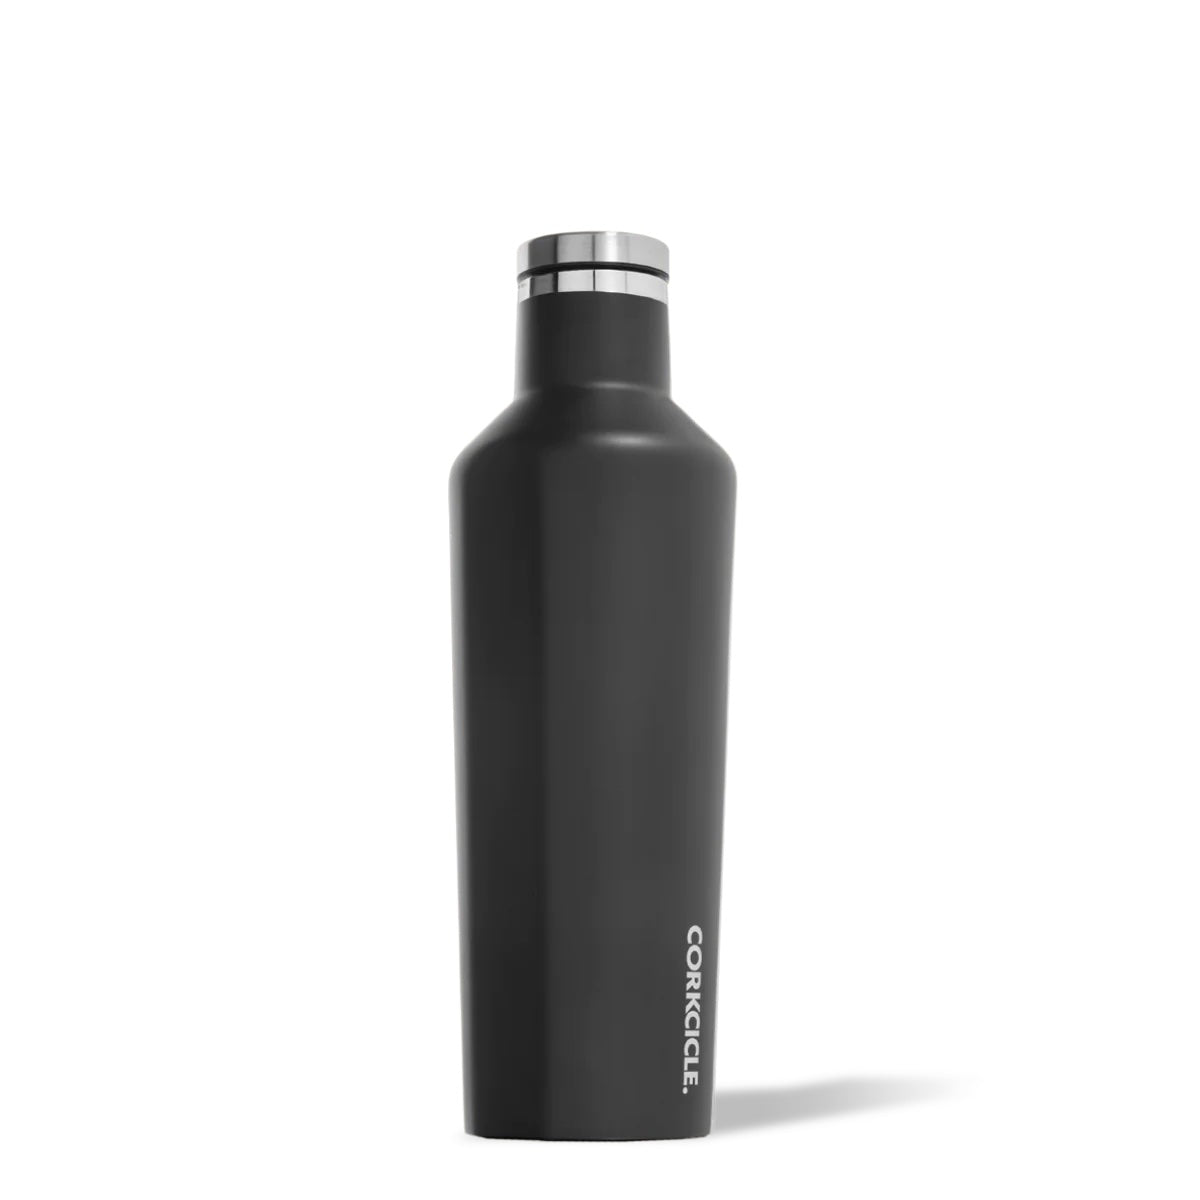 Corkcicle Classic Canteen 475ml - Matte Black - Insulated Stainless Steel Bottle